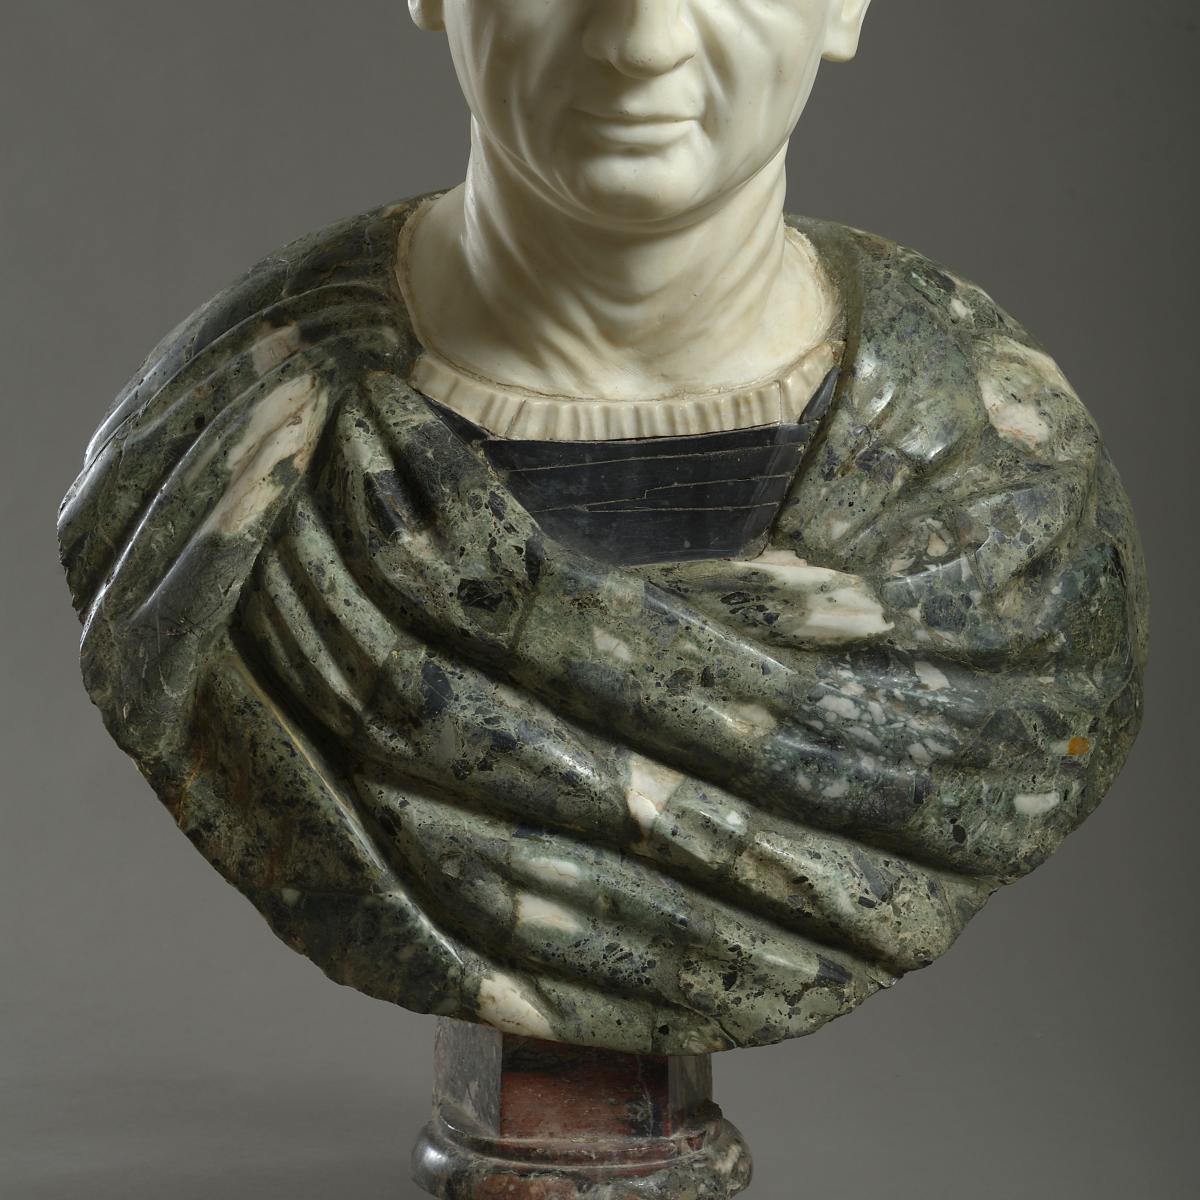 Massive Statuary and Polychrome Marble Bust of an Emperor